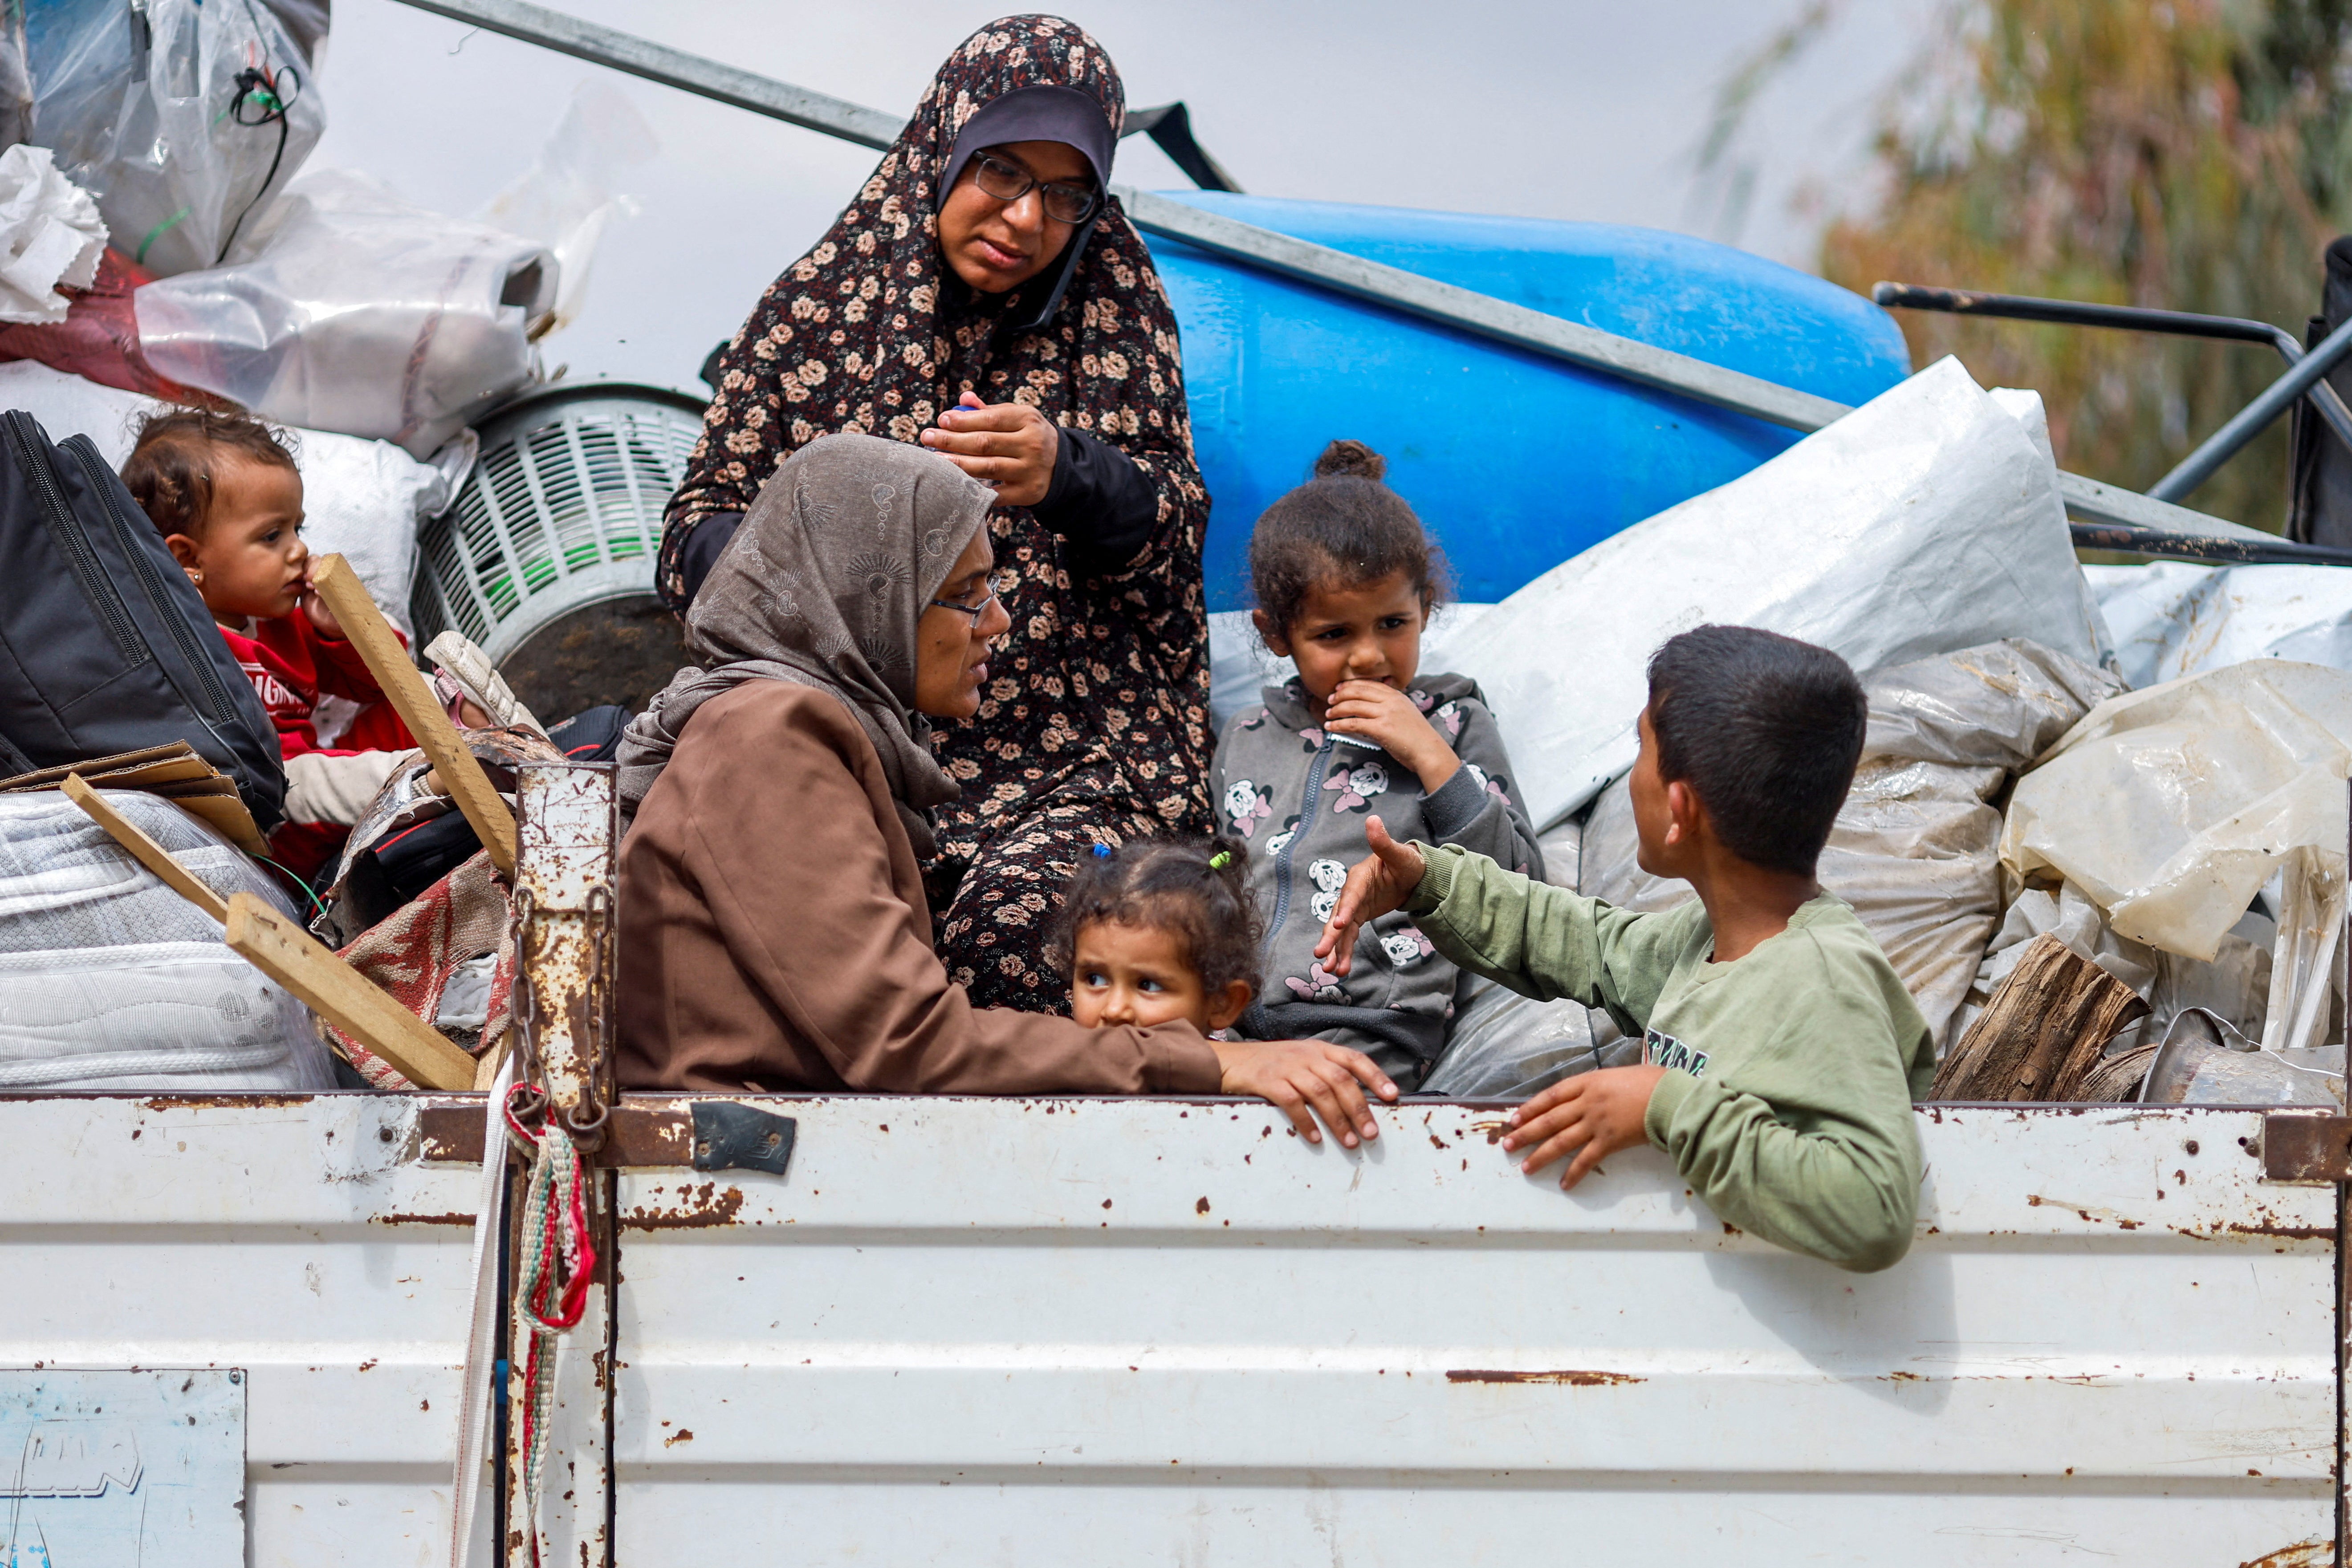 Palestinians ride on a vehicle as they flee Rafah – the UN estimates some 360,000 have left the city in the past week